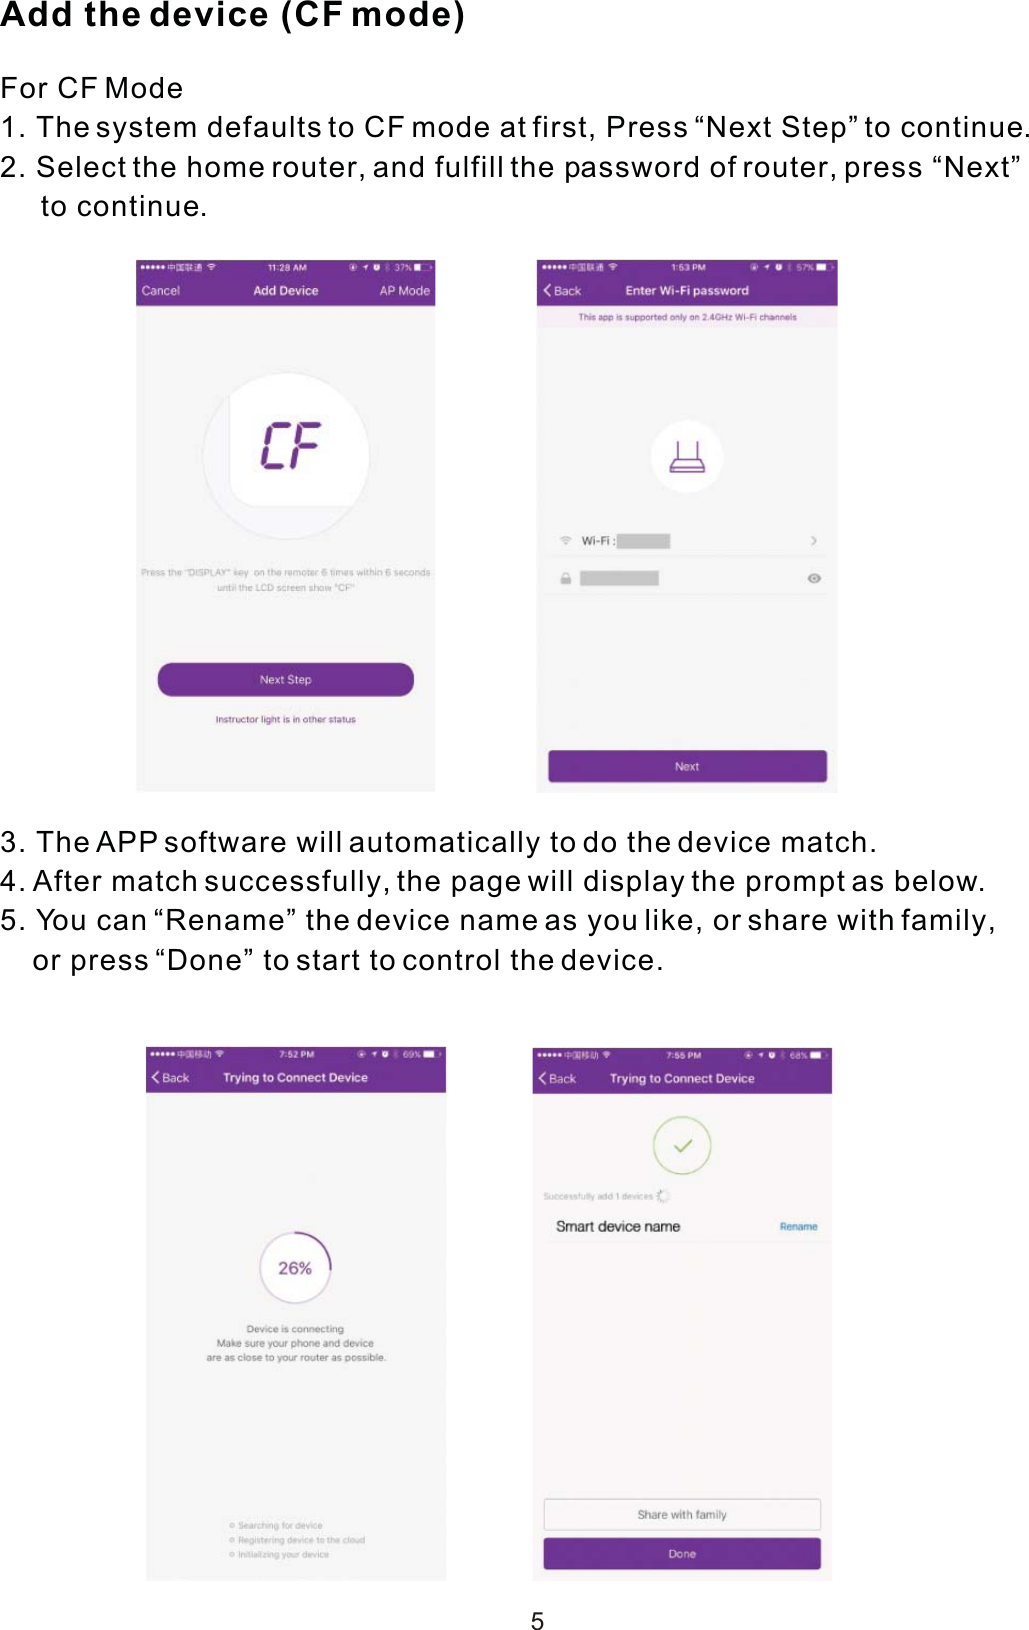 5Add the device (CF mode)For CF Mode1. The system defaults to CF mode at first, Press “Next Step” to continue.2. Select the home router, and fulfill the password of router, press “Next”     to continue.3. The APP software will automatically to do the device match. 4. After match successfully, the page will display the prompt as below.5. You can “Rename” the device name as you like, or share with family,    or press “Done” to start to control the device. 